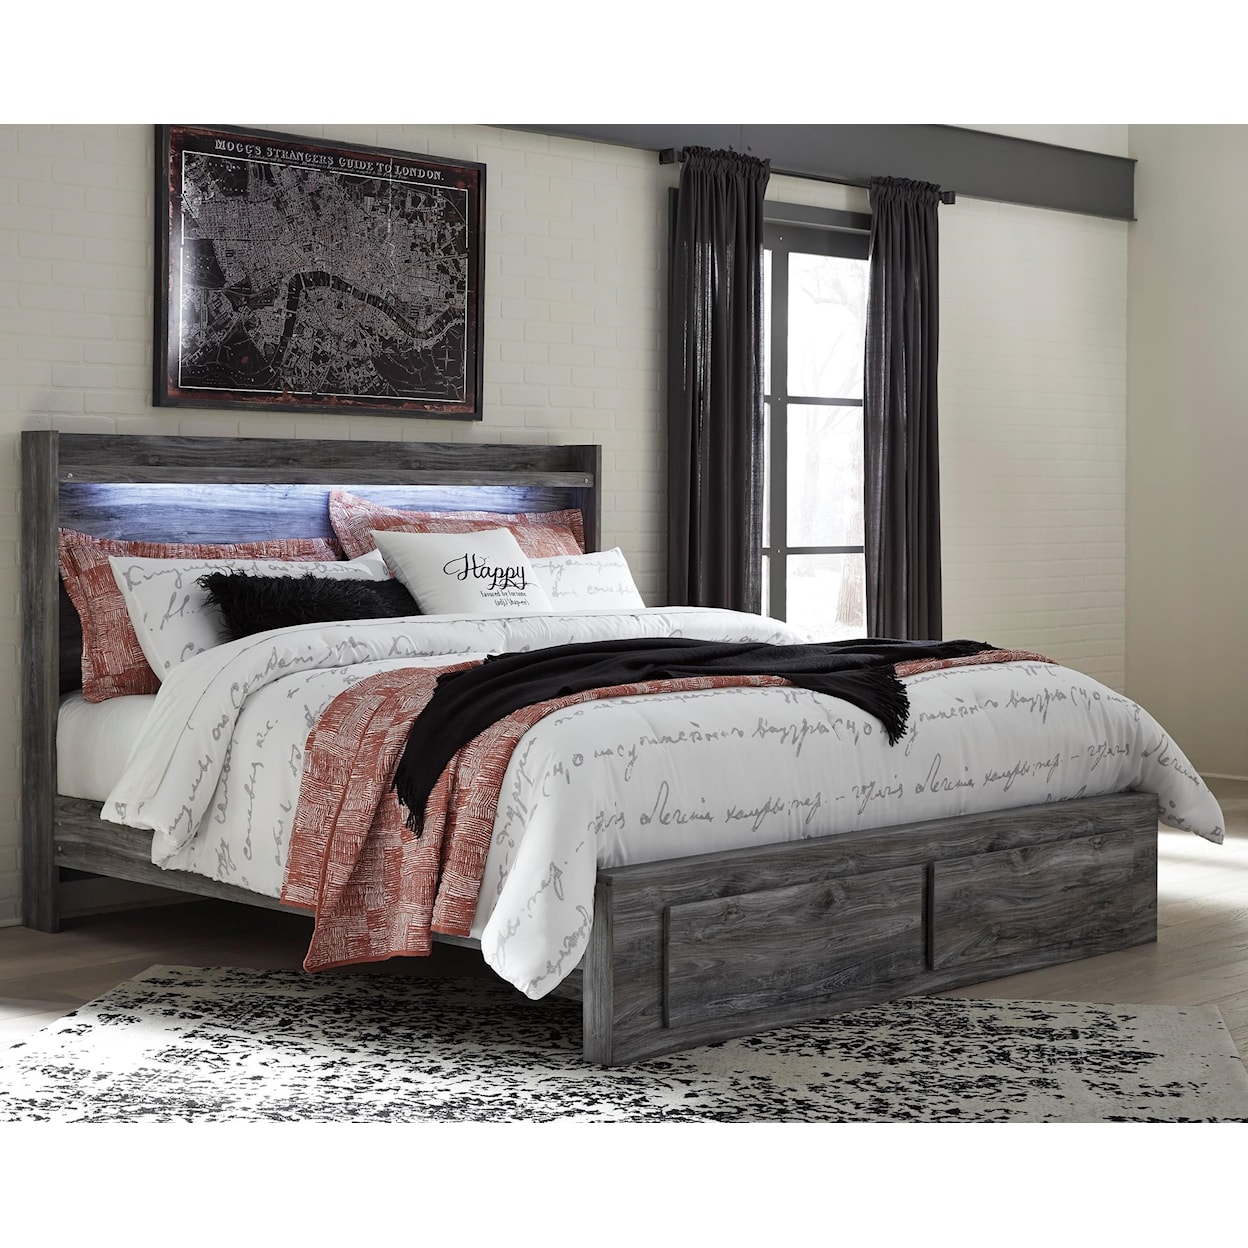 Signature Design Baystorm King Panel Bed with Storage Footboard